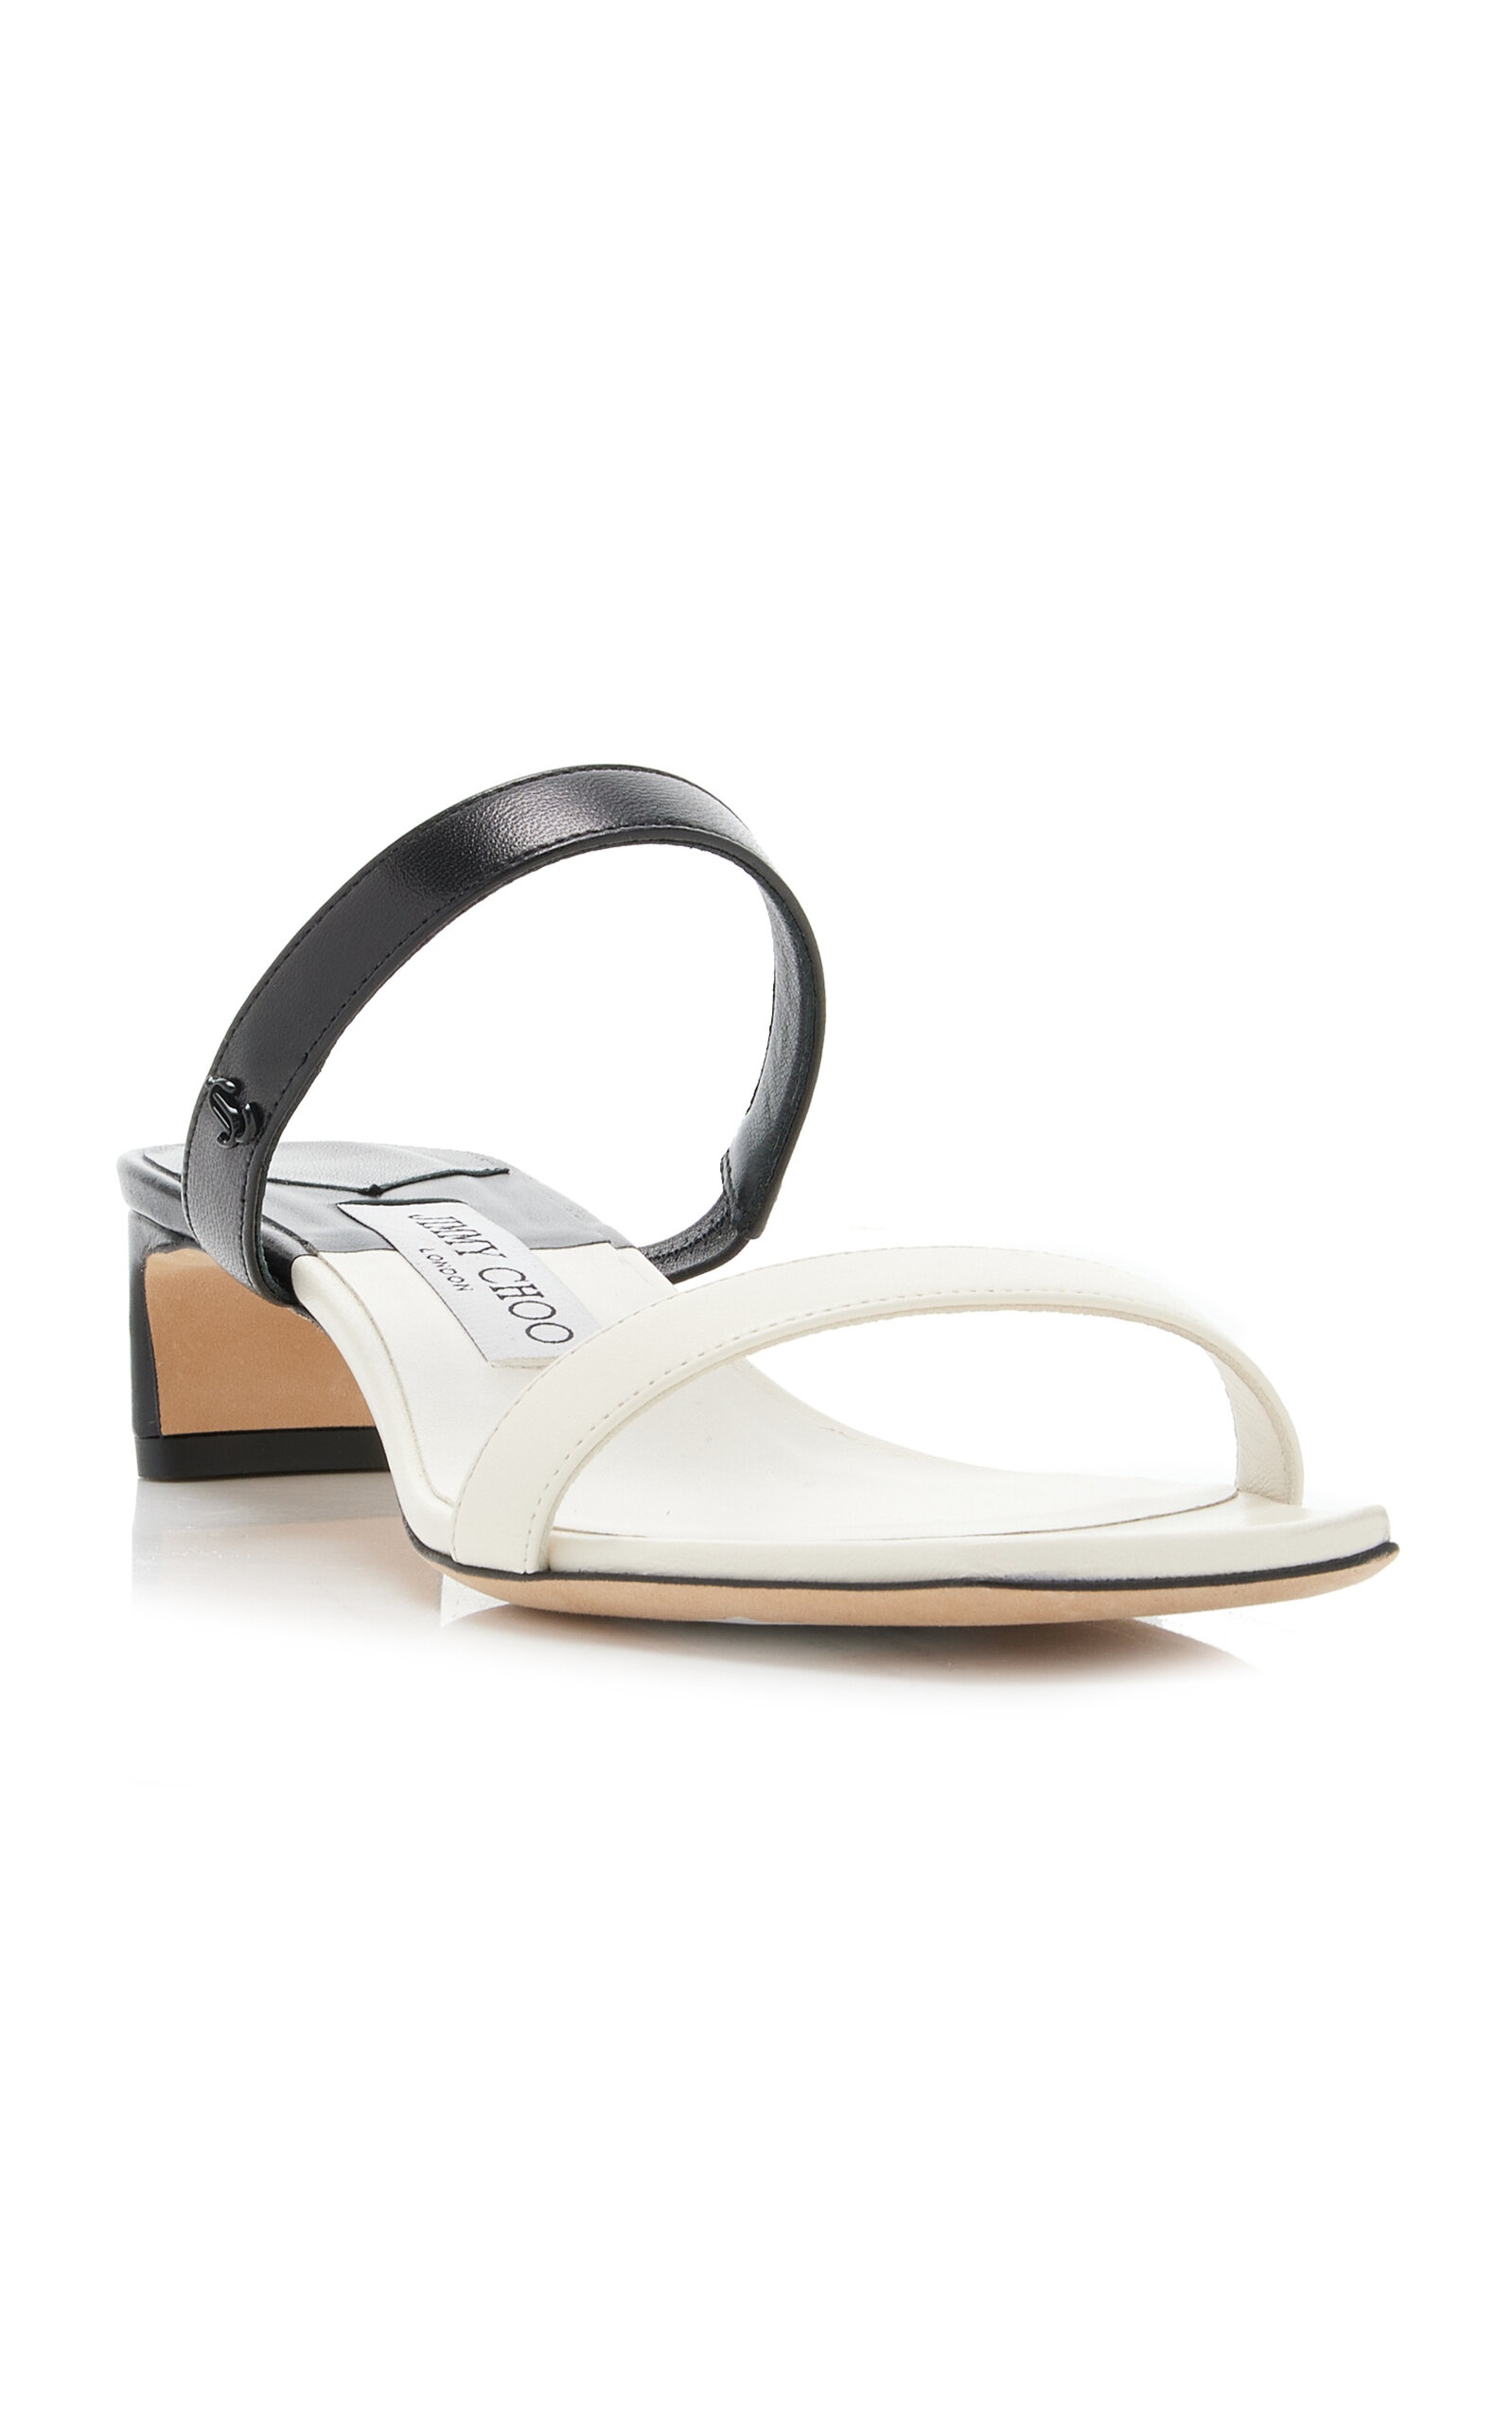 Kyda Color-Blocked Leather Sandals black/white - 4